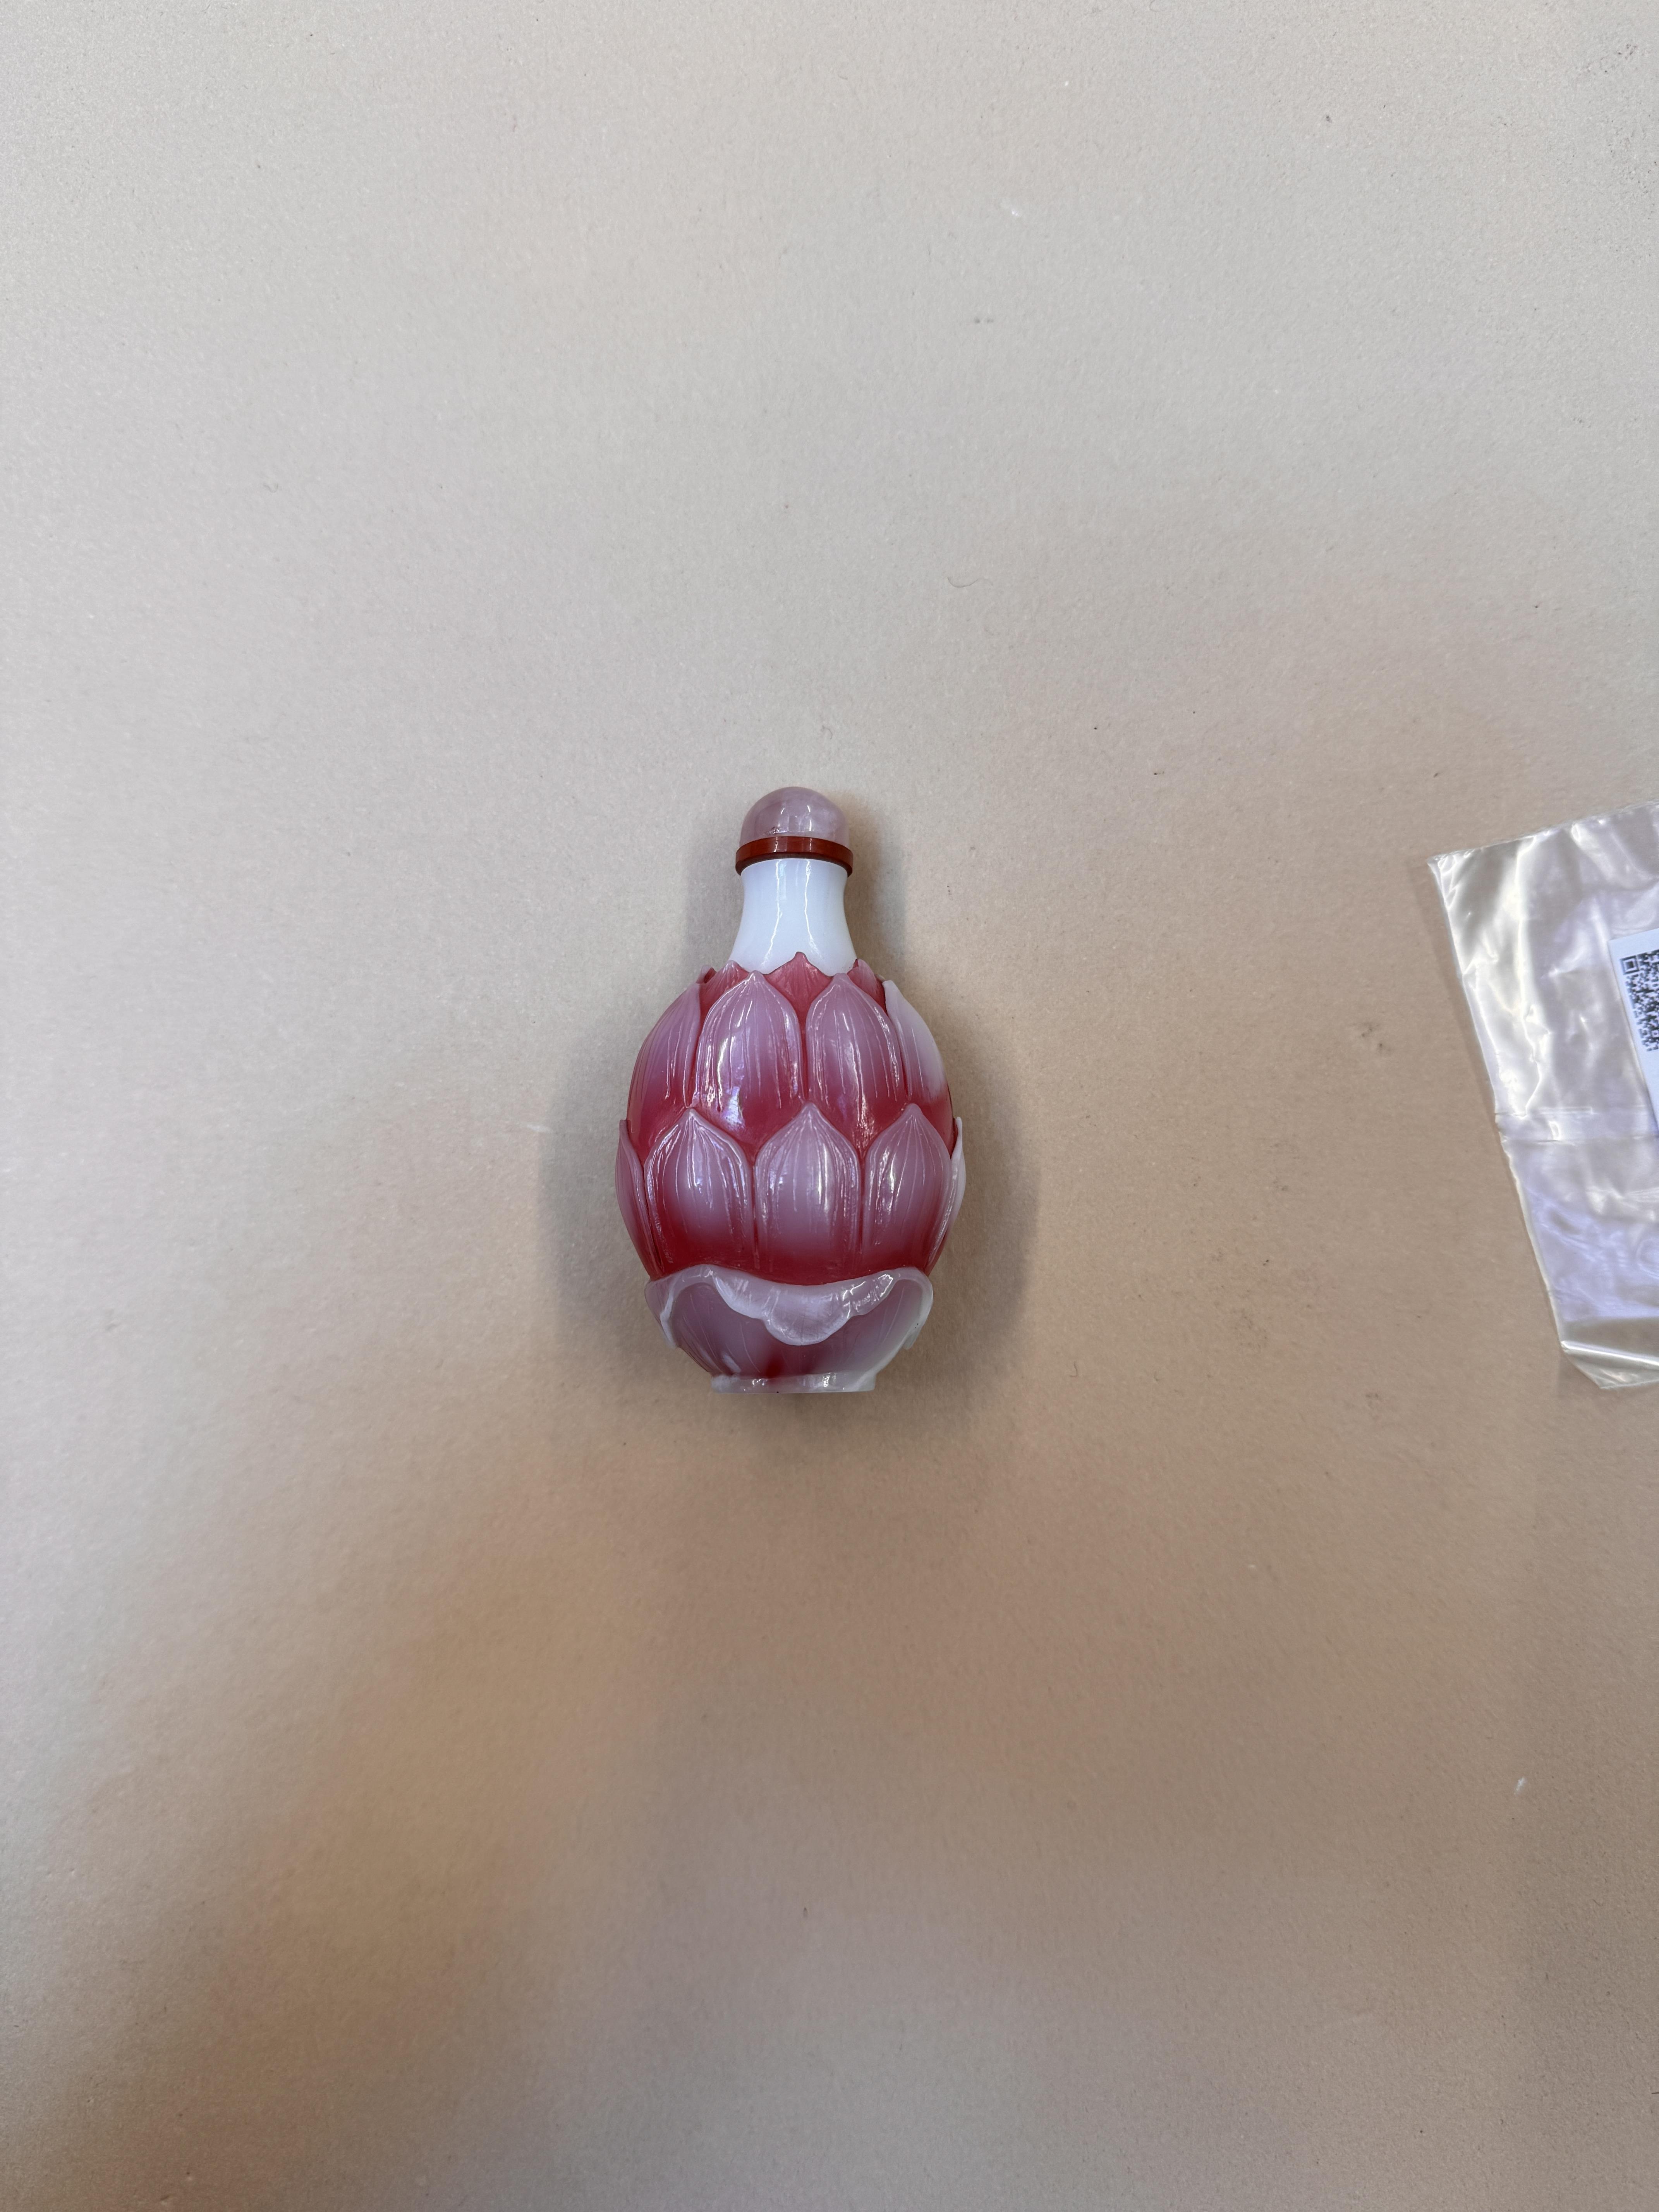 A CHINESE WHITE AND PINK BEIJING GLASS 'LOTUS' SNUFF BOTTLE 十九世紀 粉紅料荷花形鼻煙壺 - Image 8 of 16